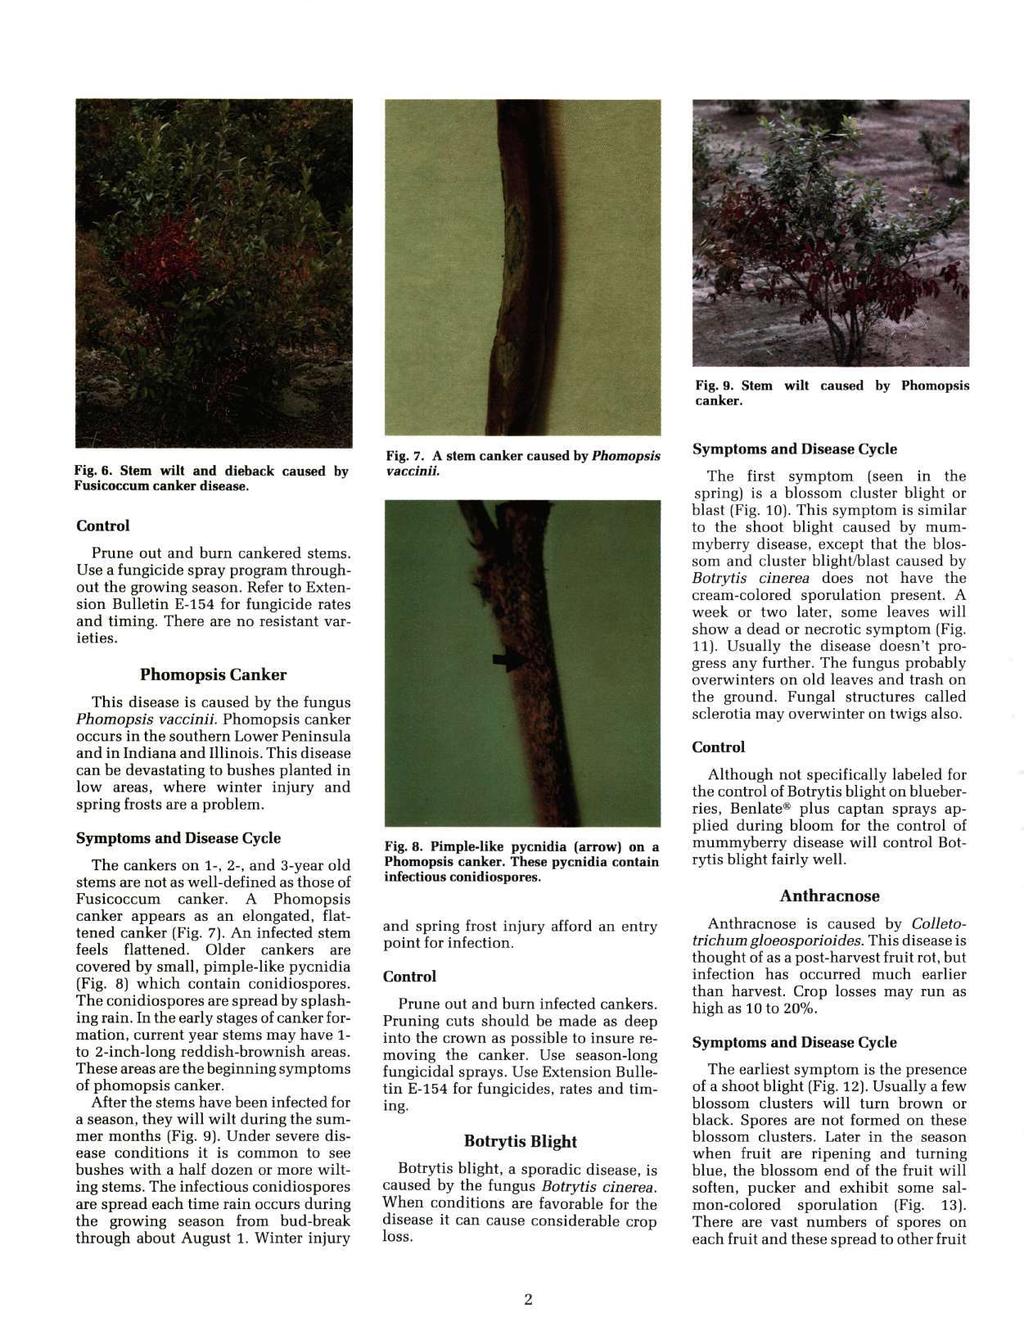 Fig. 9. Stem wilt caused by Phomopsis canker. Fig. 6. Stem wilt and dieback caused by Fusicoccum canker disease. Prune out and burn cankered stems.